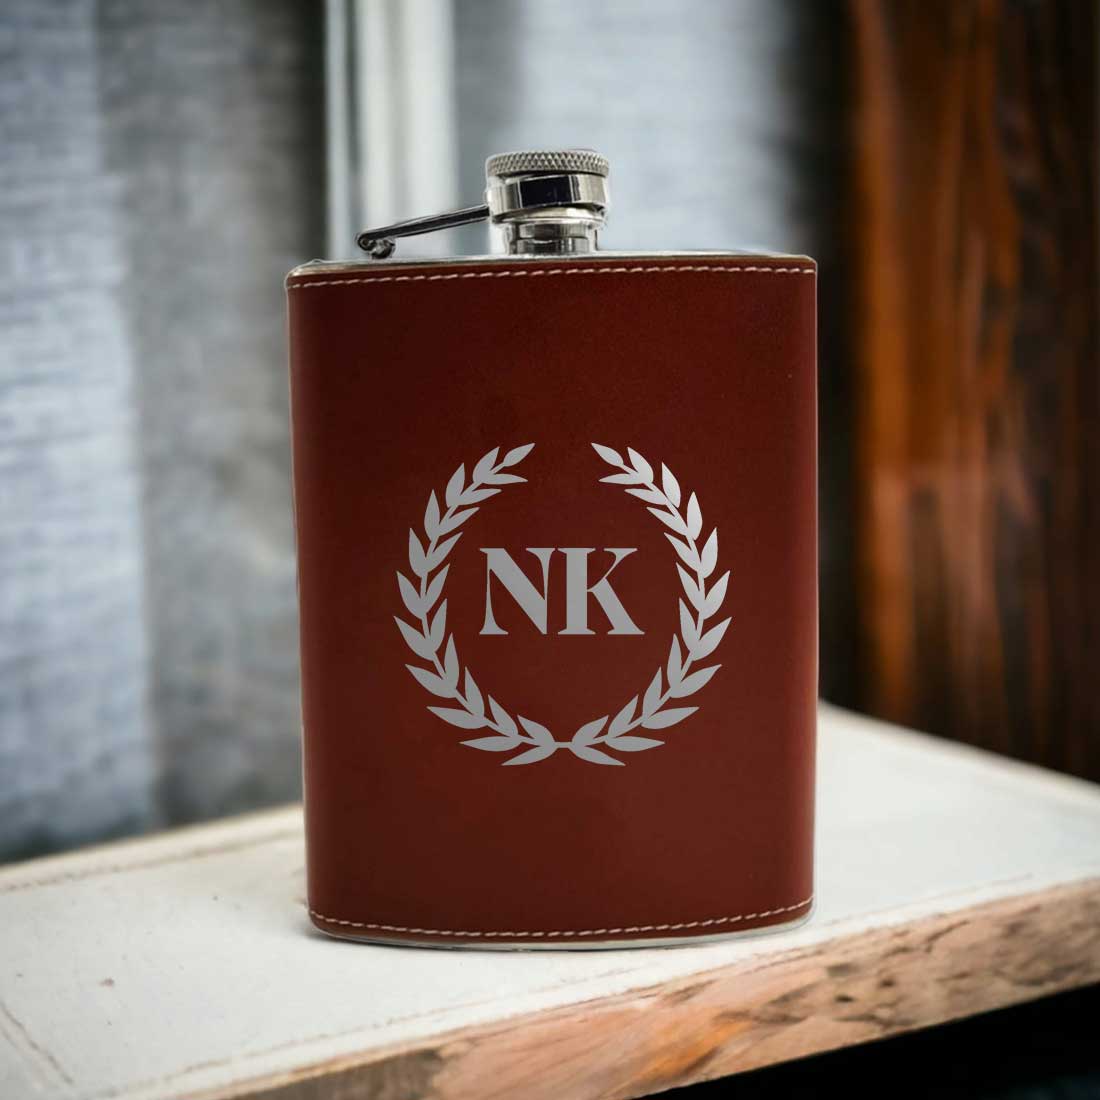 PU Leather Hip Flask With Name